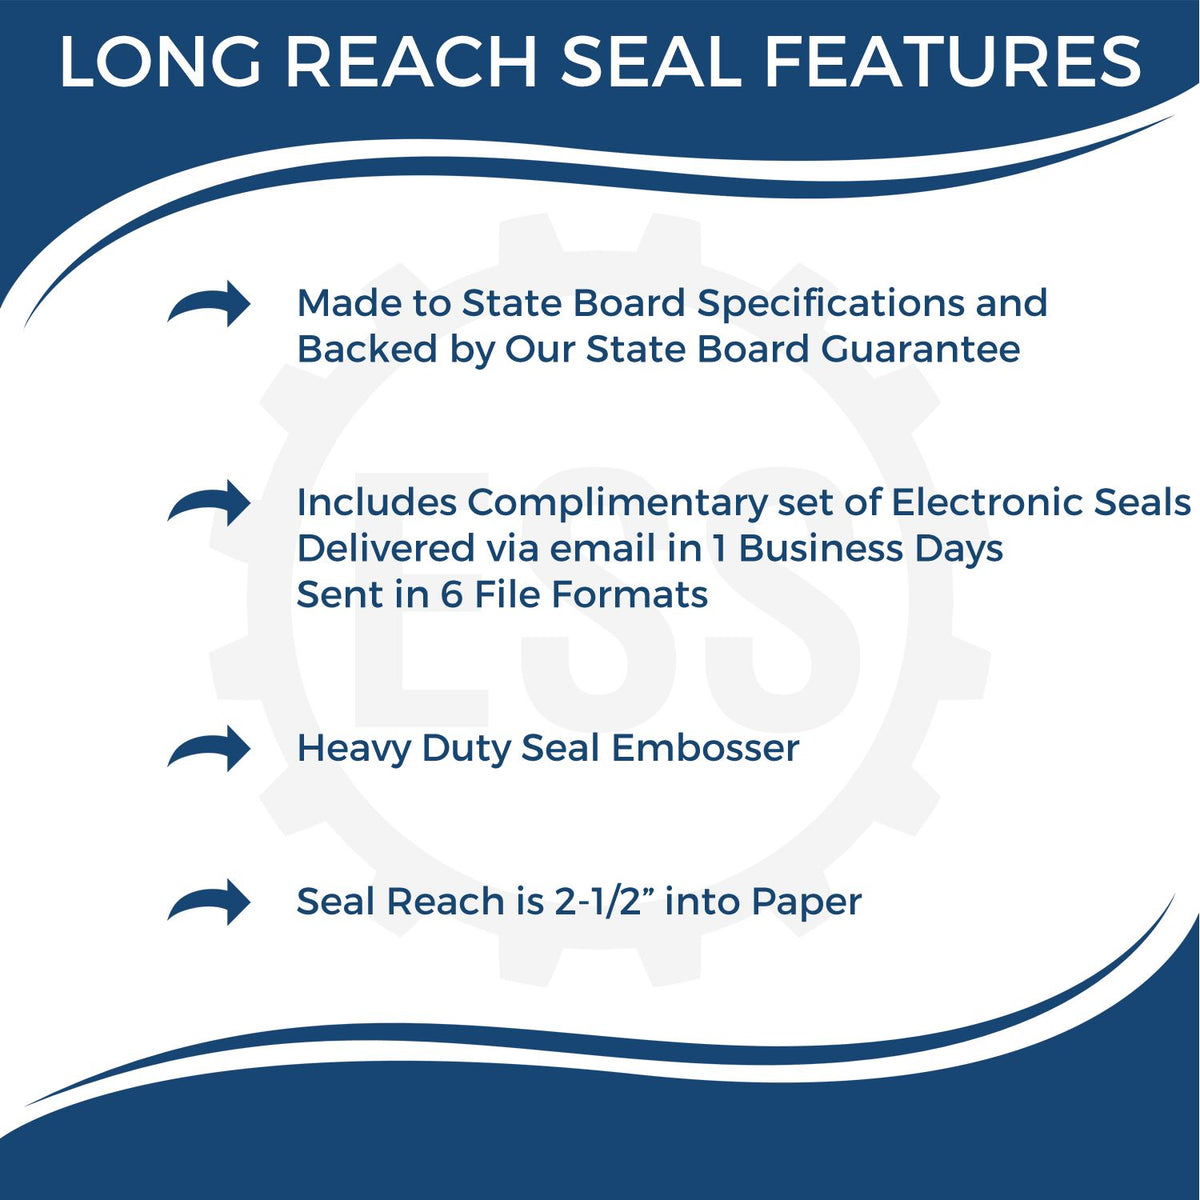 A picture of an infographic highlighting the selling points for the Long Reach Ohio Geology Seal